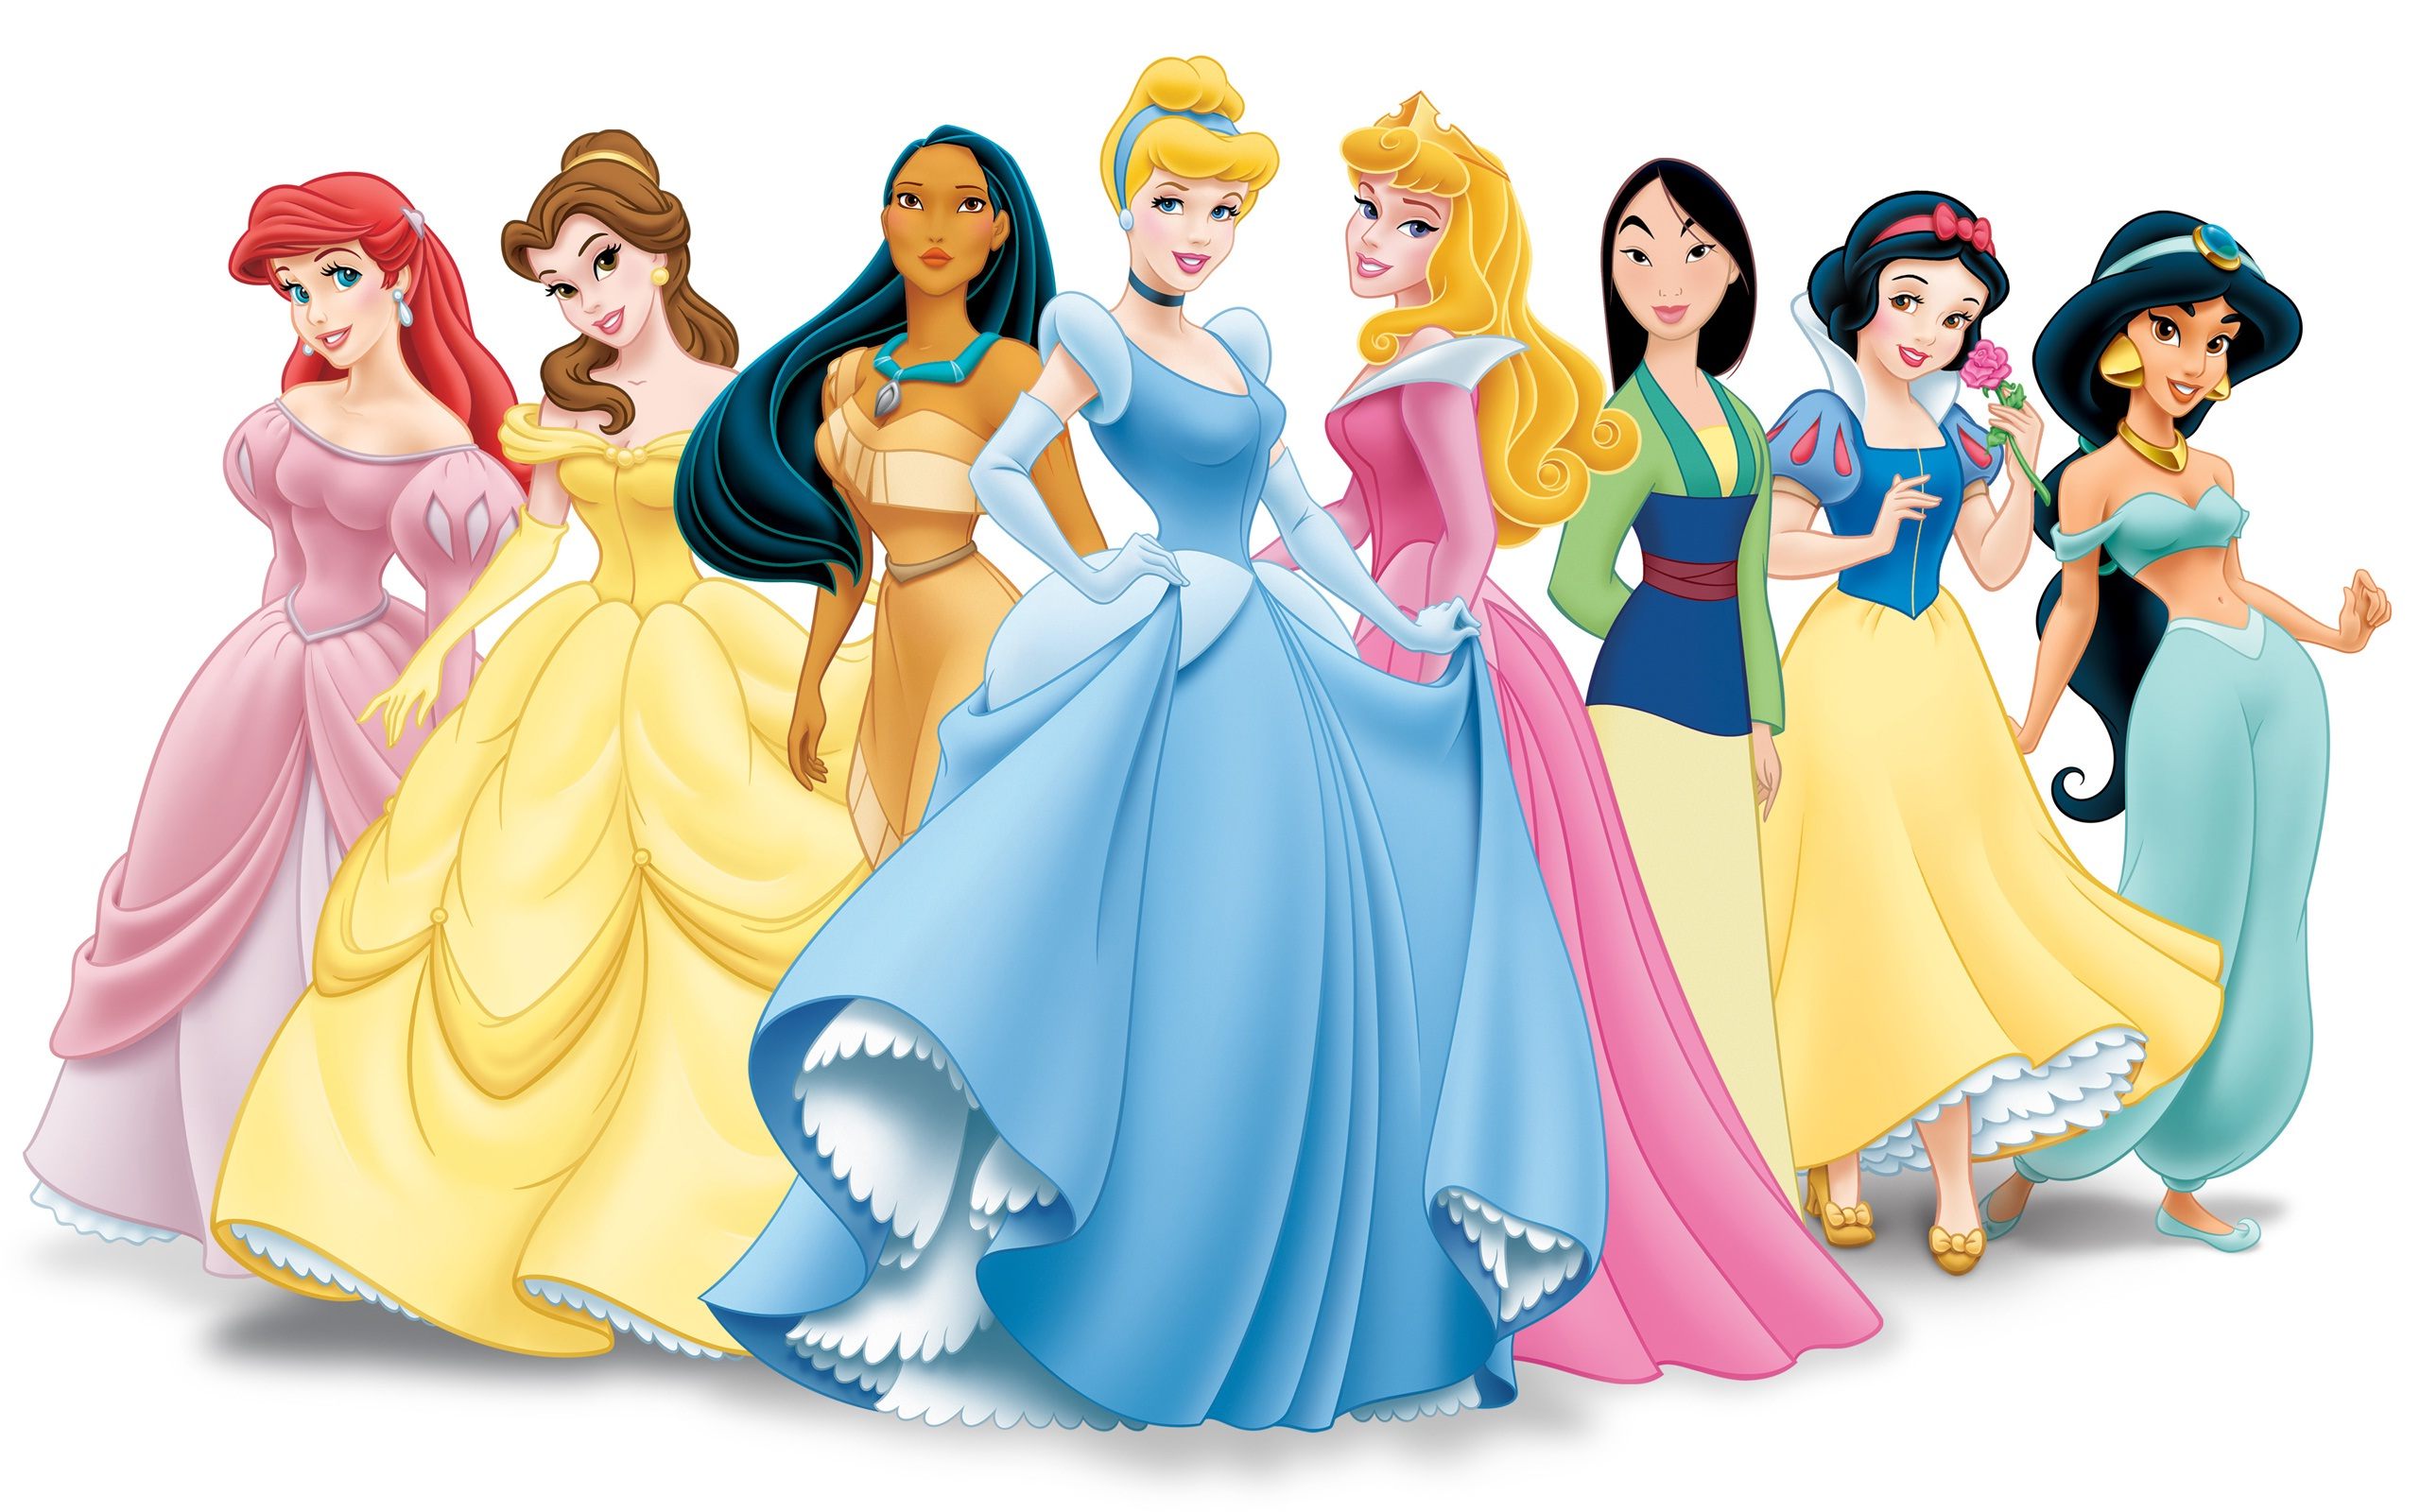 All Disney Princess Wallpaper HD Image Amp Pictures Becuo